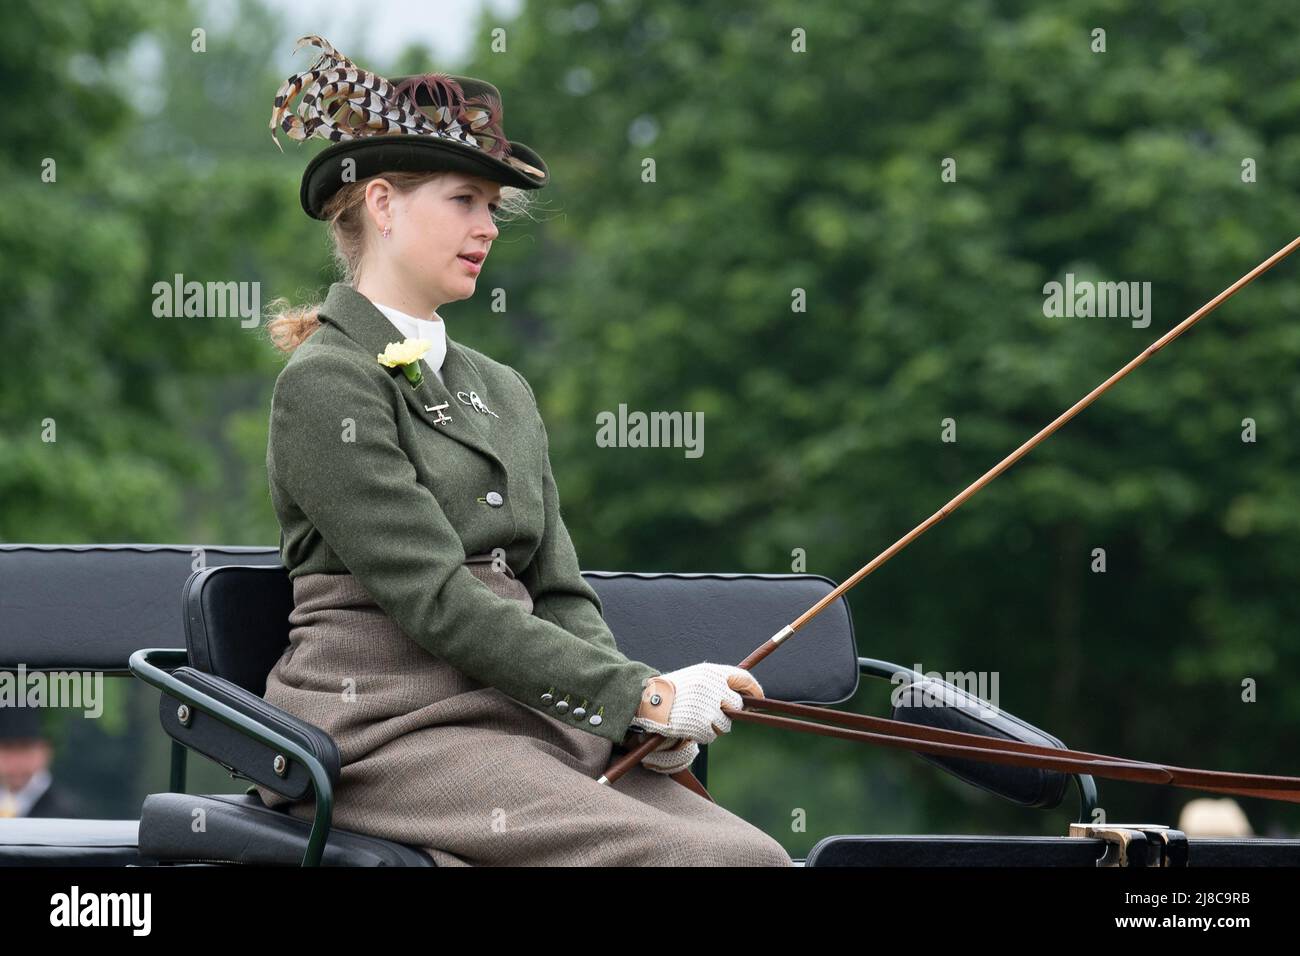 Windsor, Berkshire, UK. 15th May, 2022. Lady Louise Windsor was driving a carriage in the Champagne Laurent-Perrier Meet of the British Driving Society, Return from Drive today in the private grounds of Windsor Castle. The carriage belonged to her late Grandfather, the Duke of Edinburgh. Credit: Maureen McLean/Alamy Live News Stock Photo